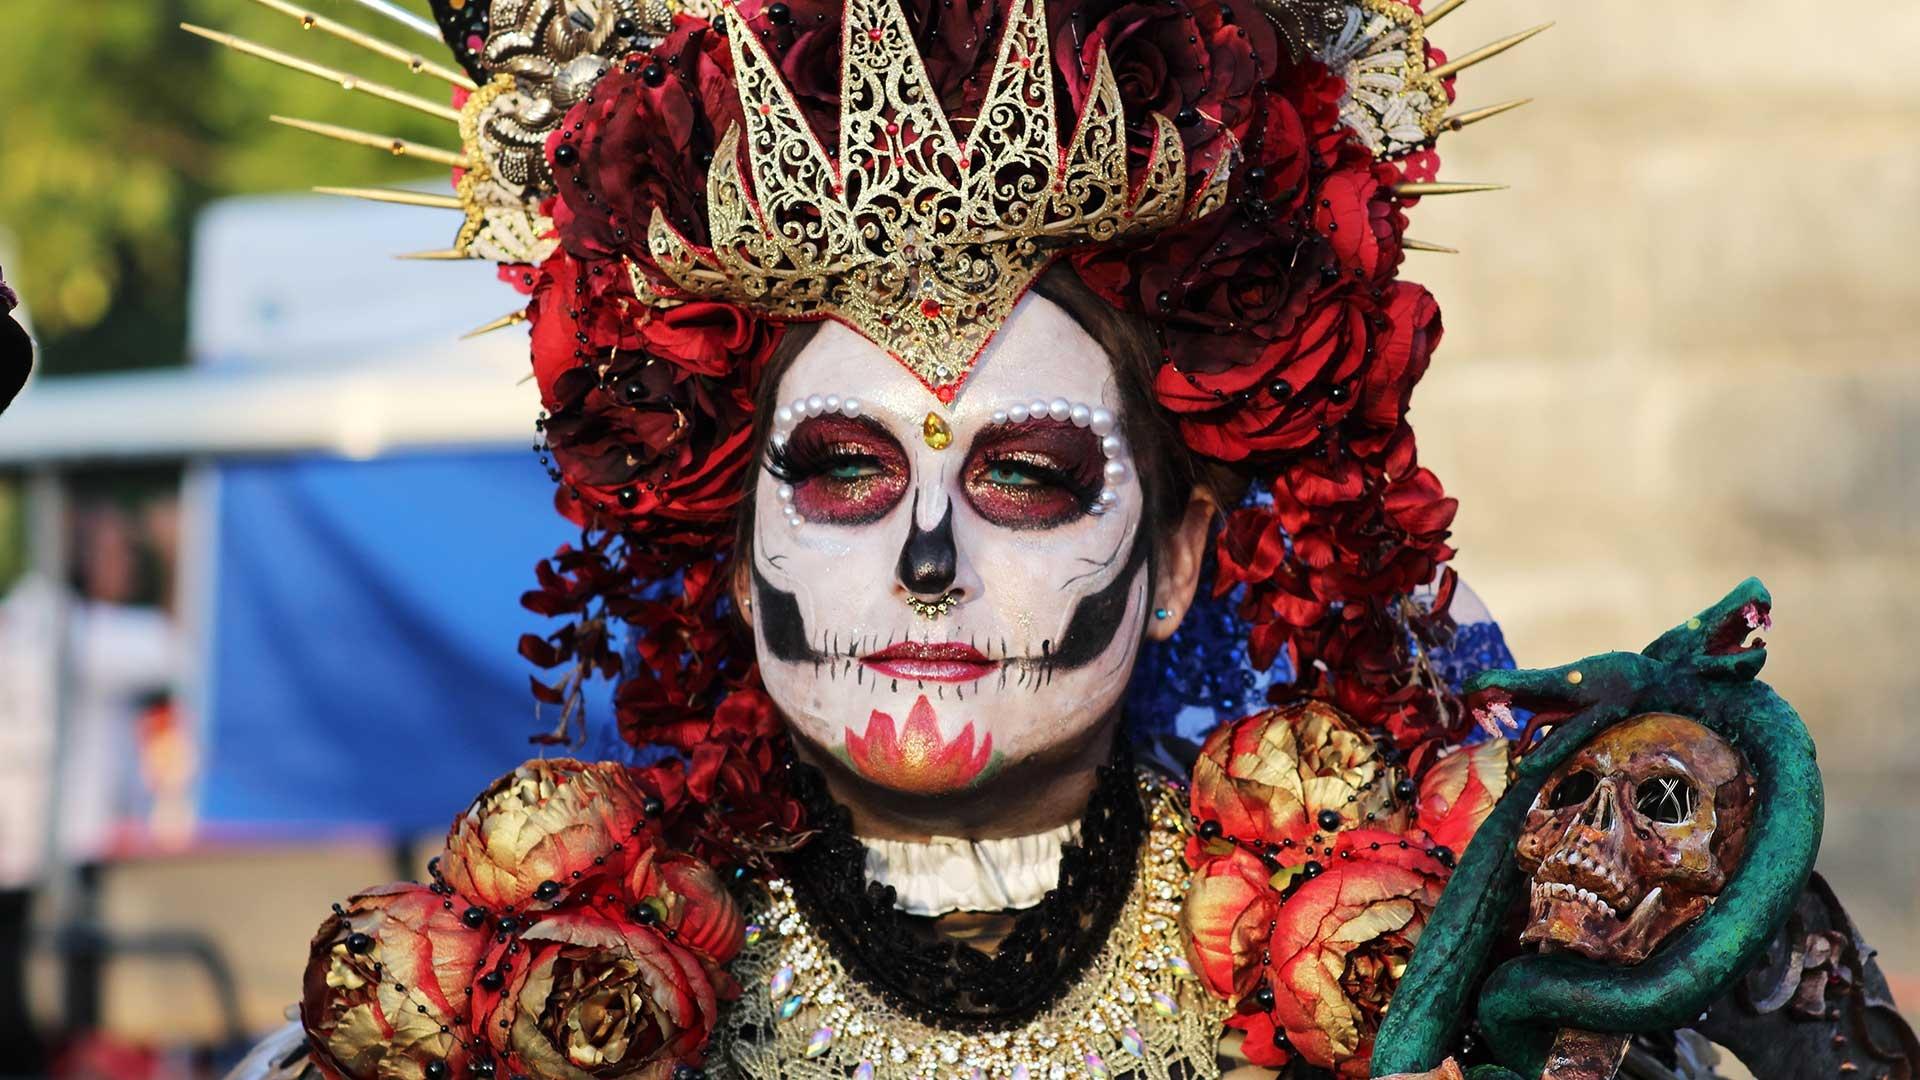 A person in skull makeup and wearing ceremonial regalia.